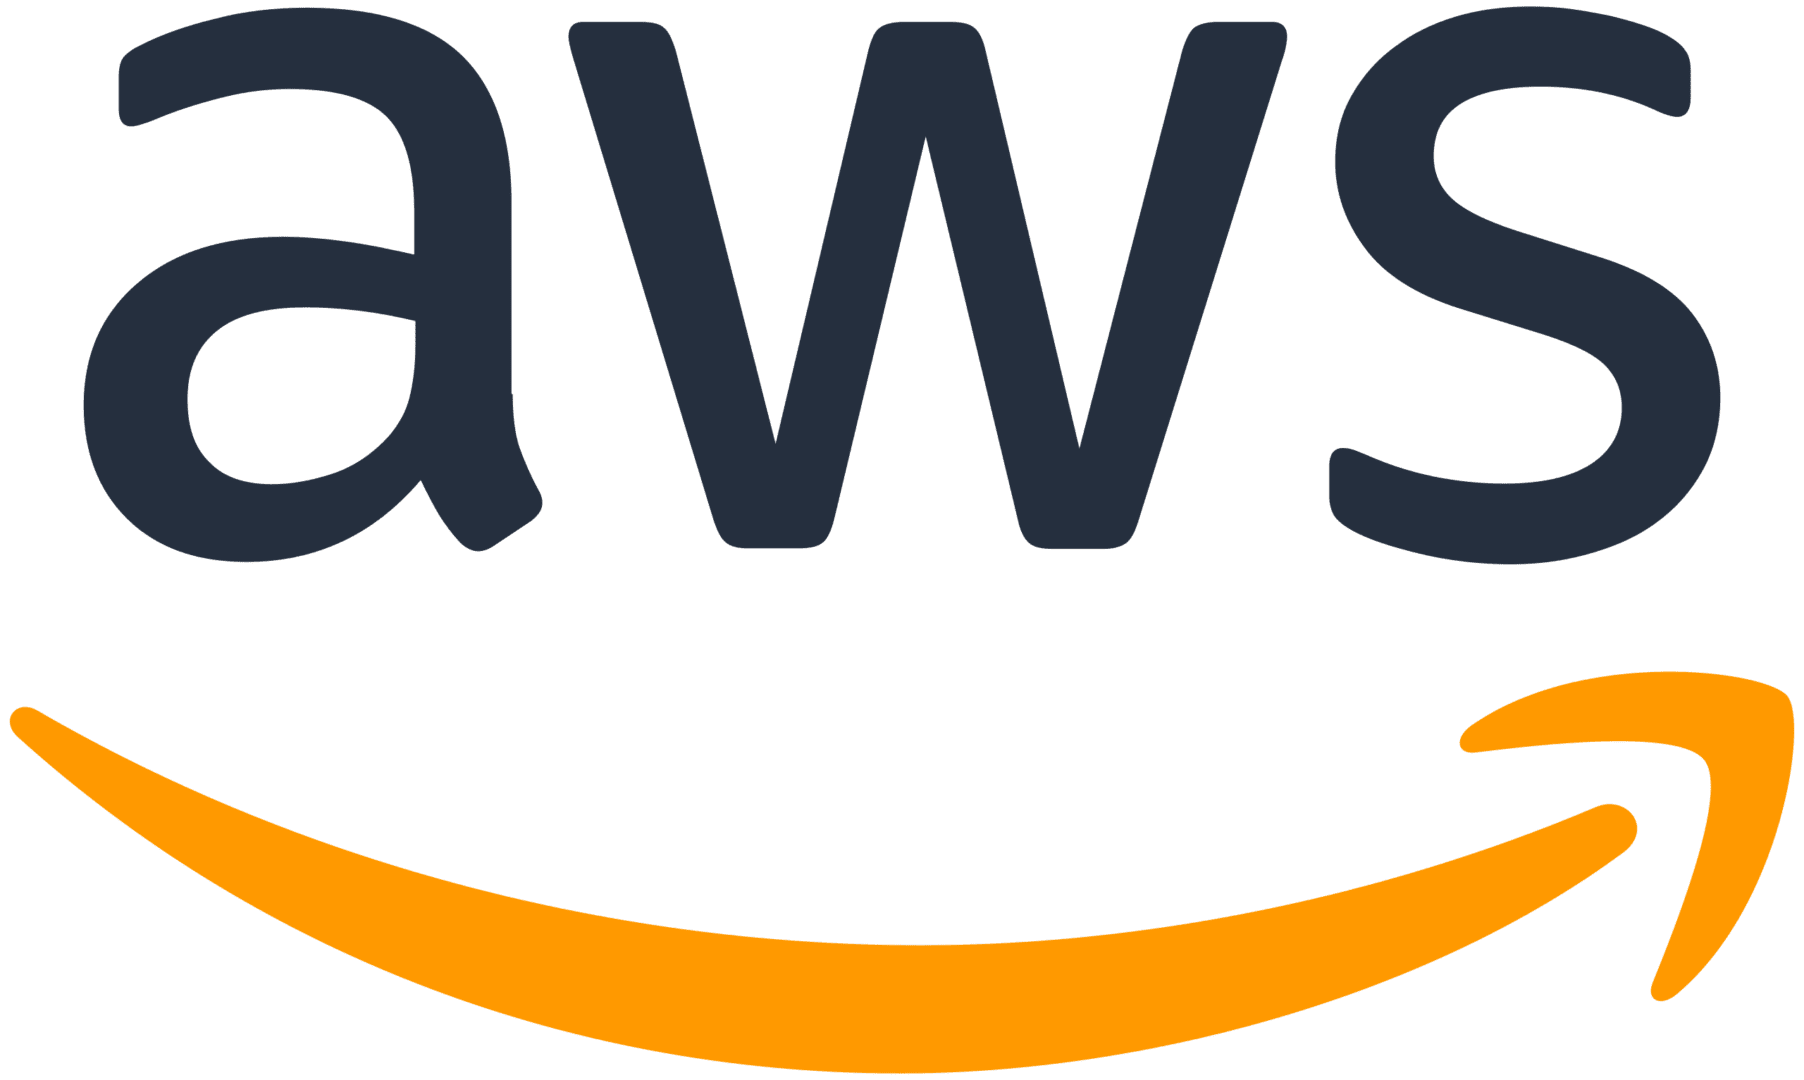 A green background with an aws logo in the middle.